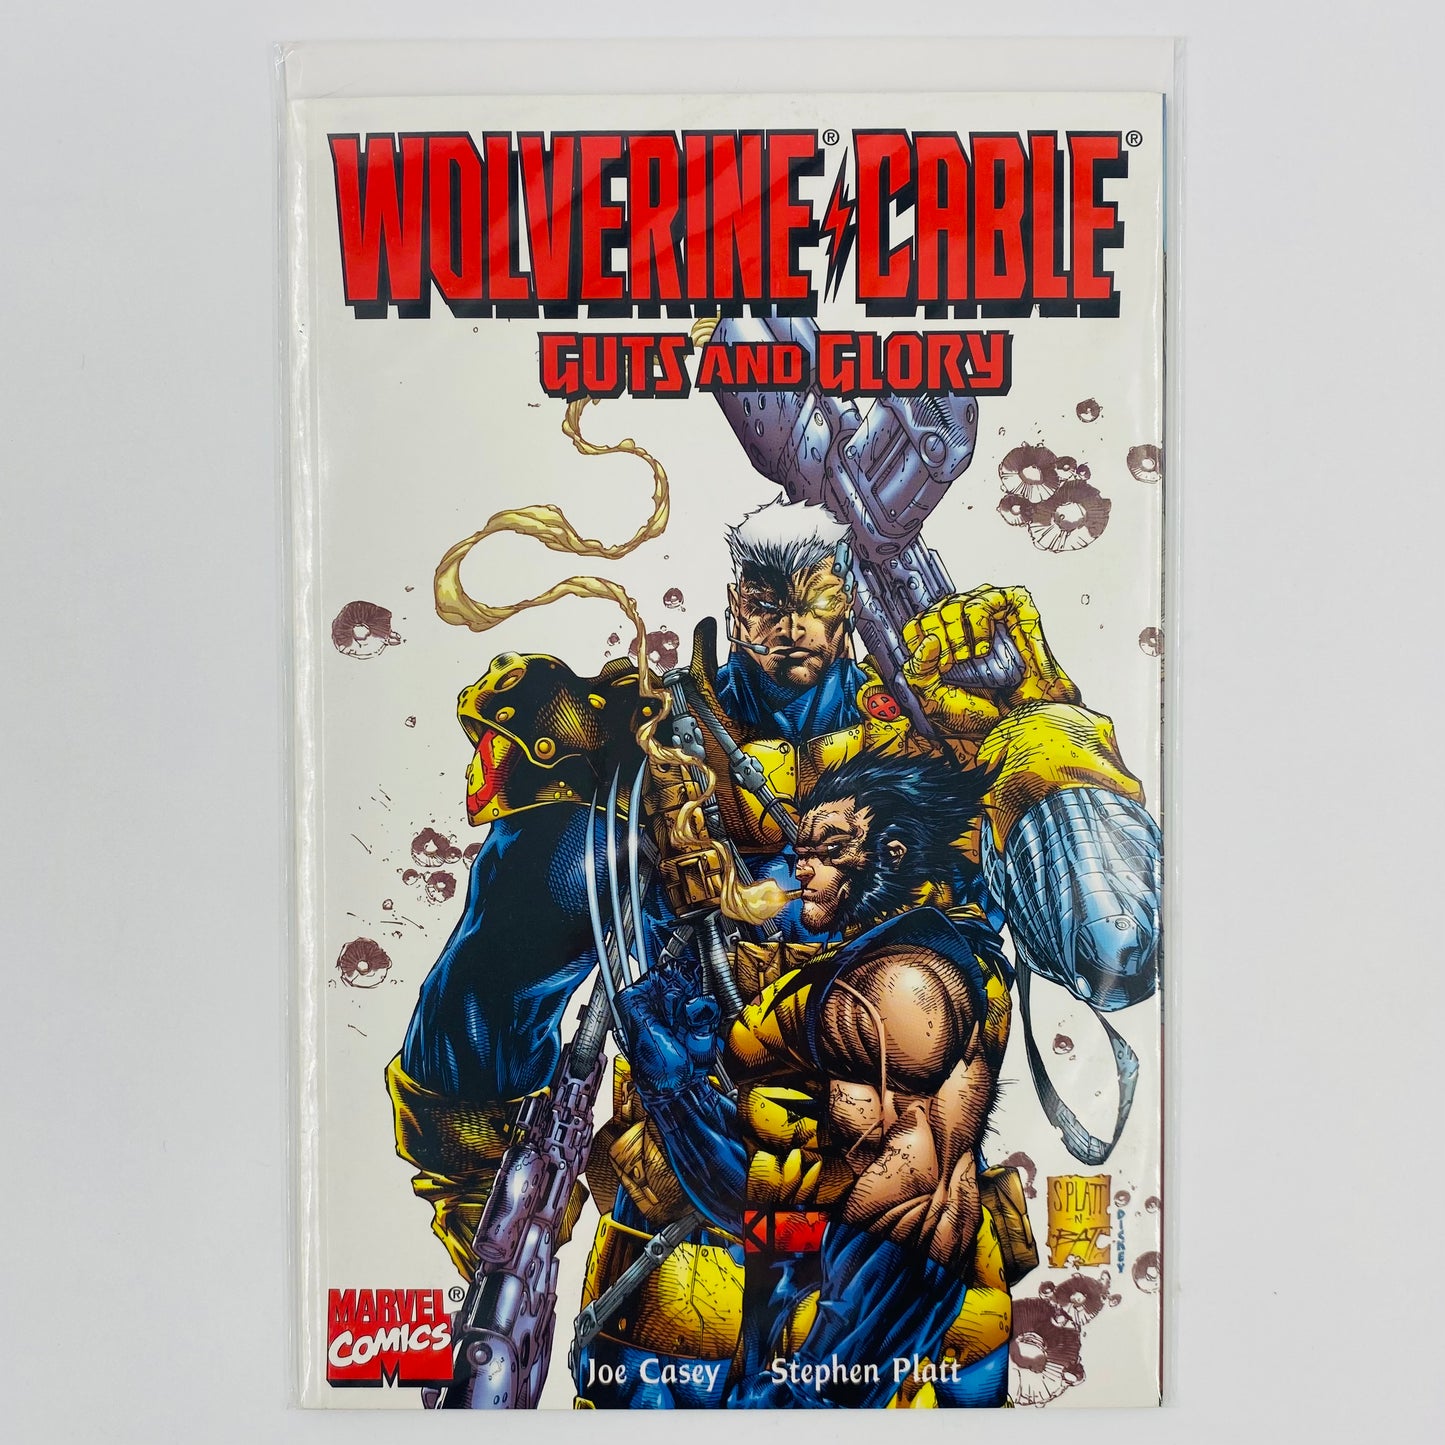 Wolverine Cable Guts & Glory (1999) Marvel